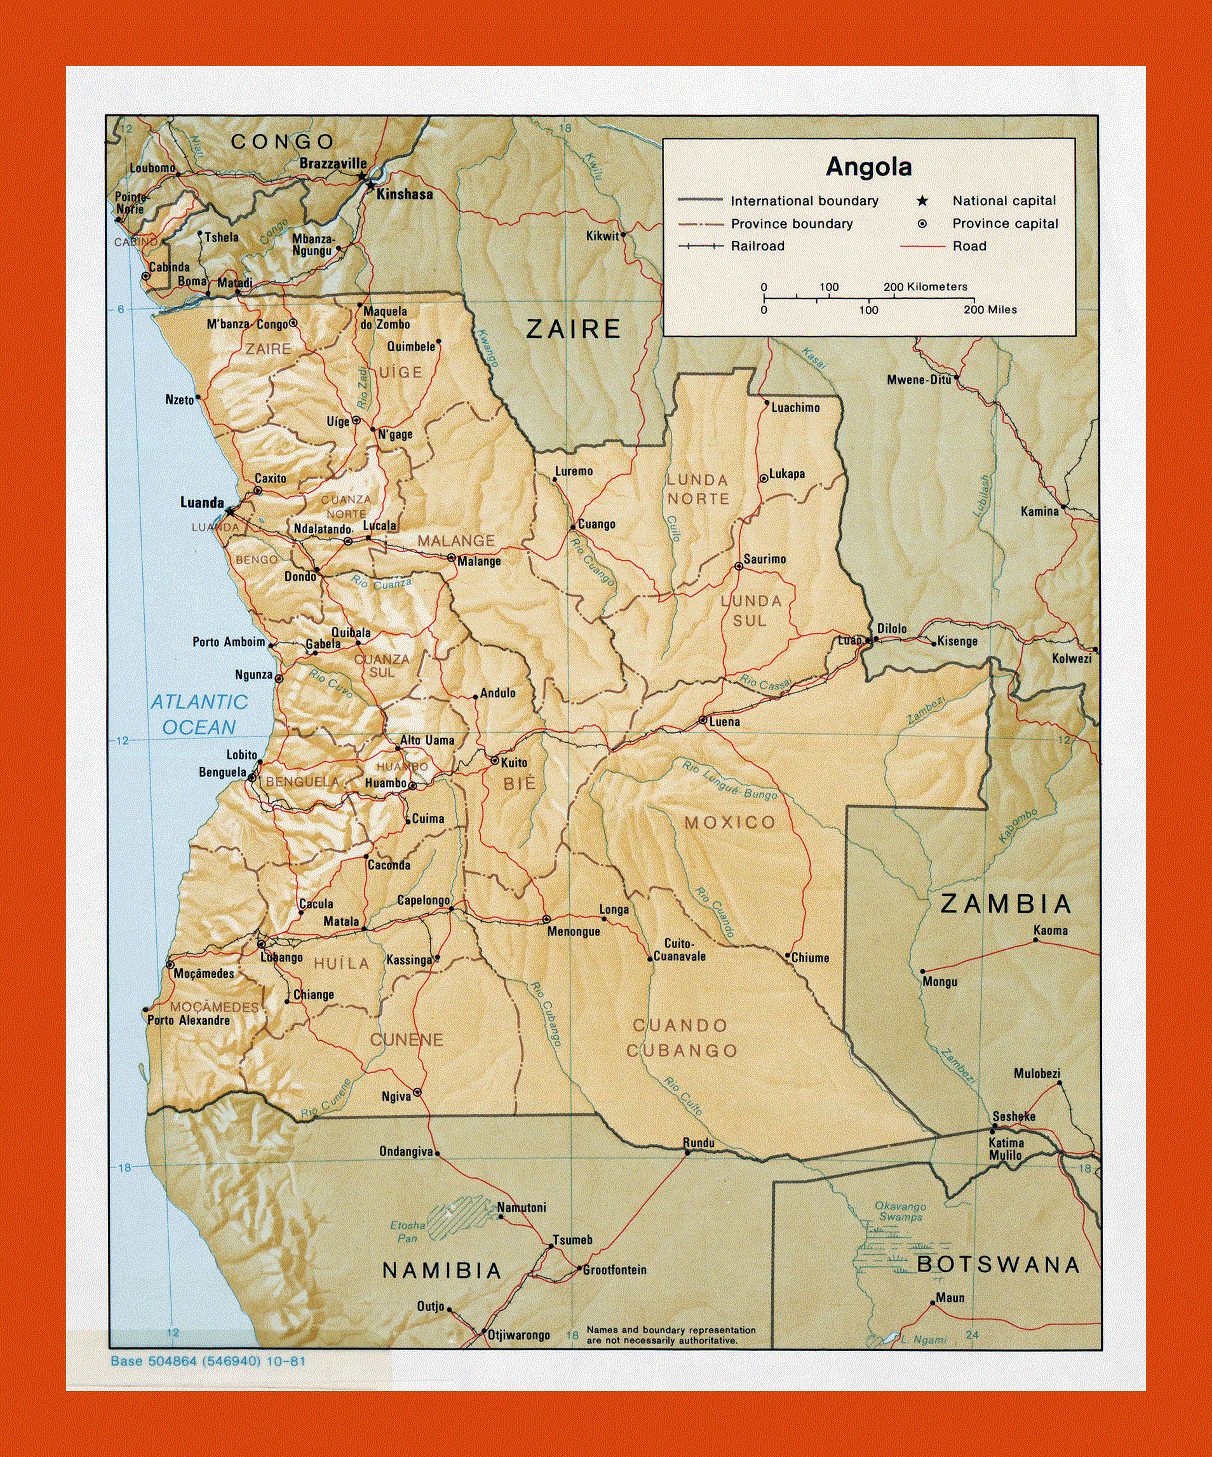 Political and administrative map of Angola - 1981